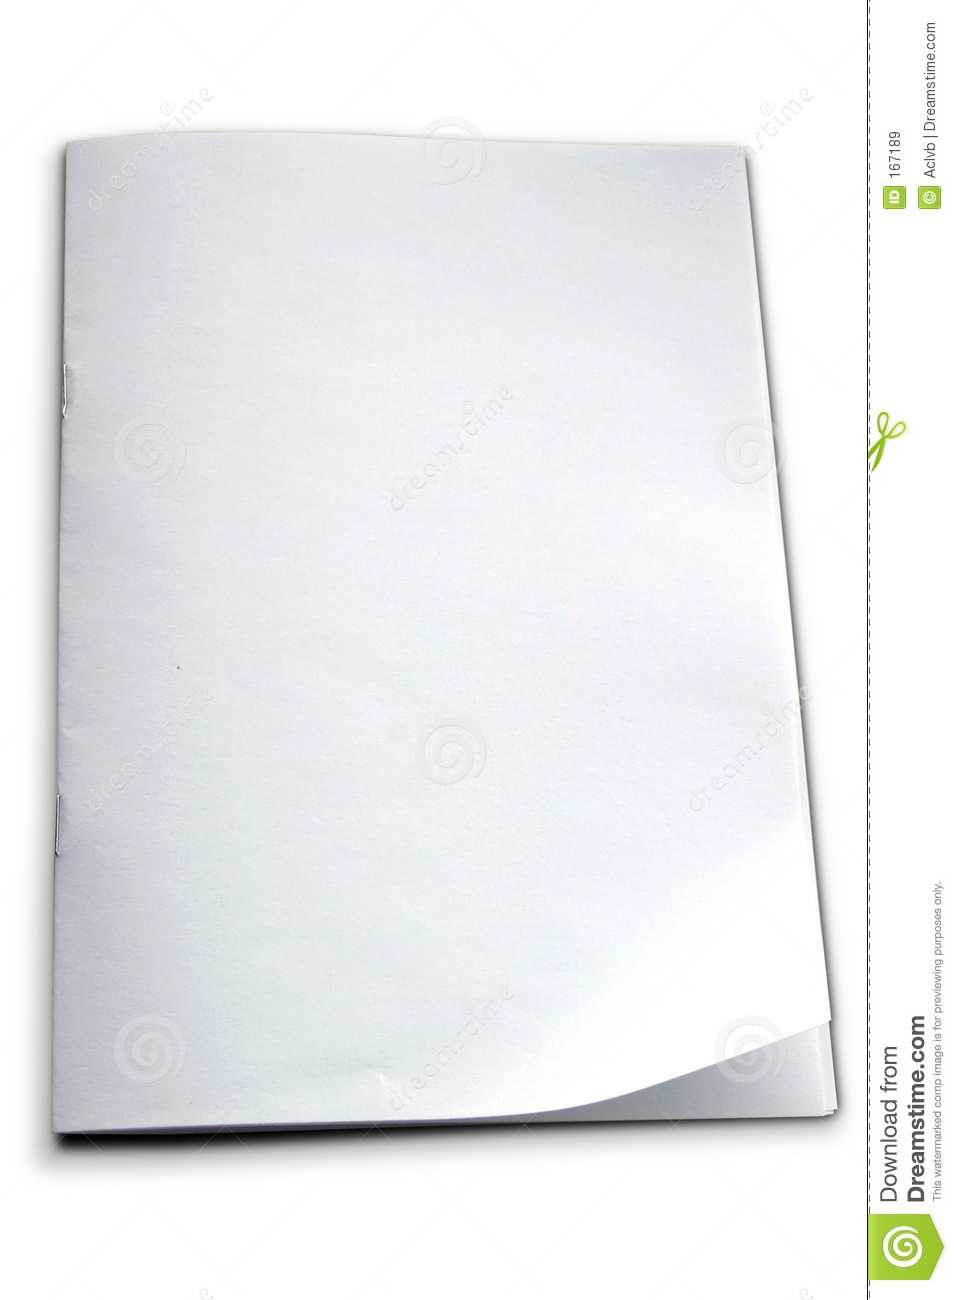 White Booklet Template Stock Image. Image Of Booklet, Book Intended For Blank Magazine Template Psd